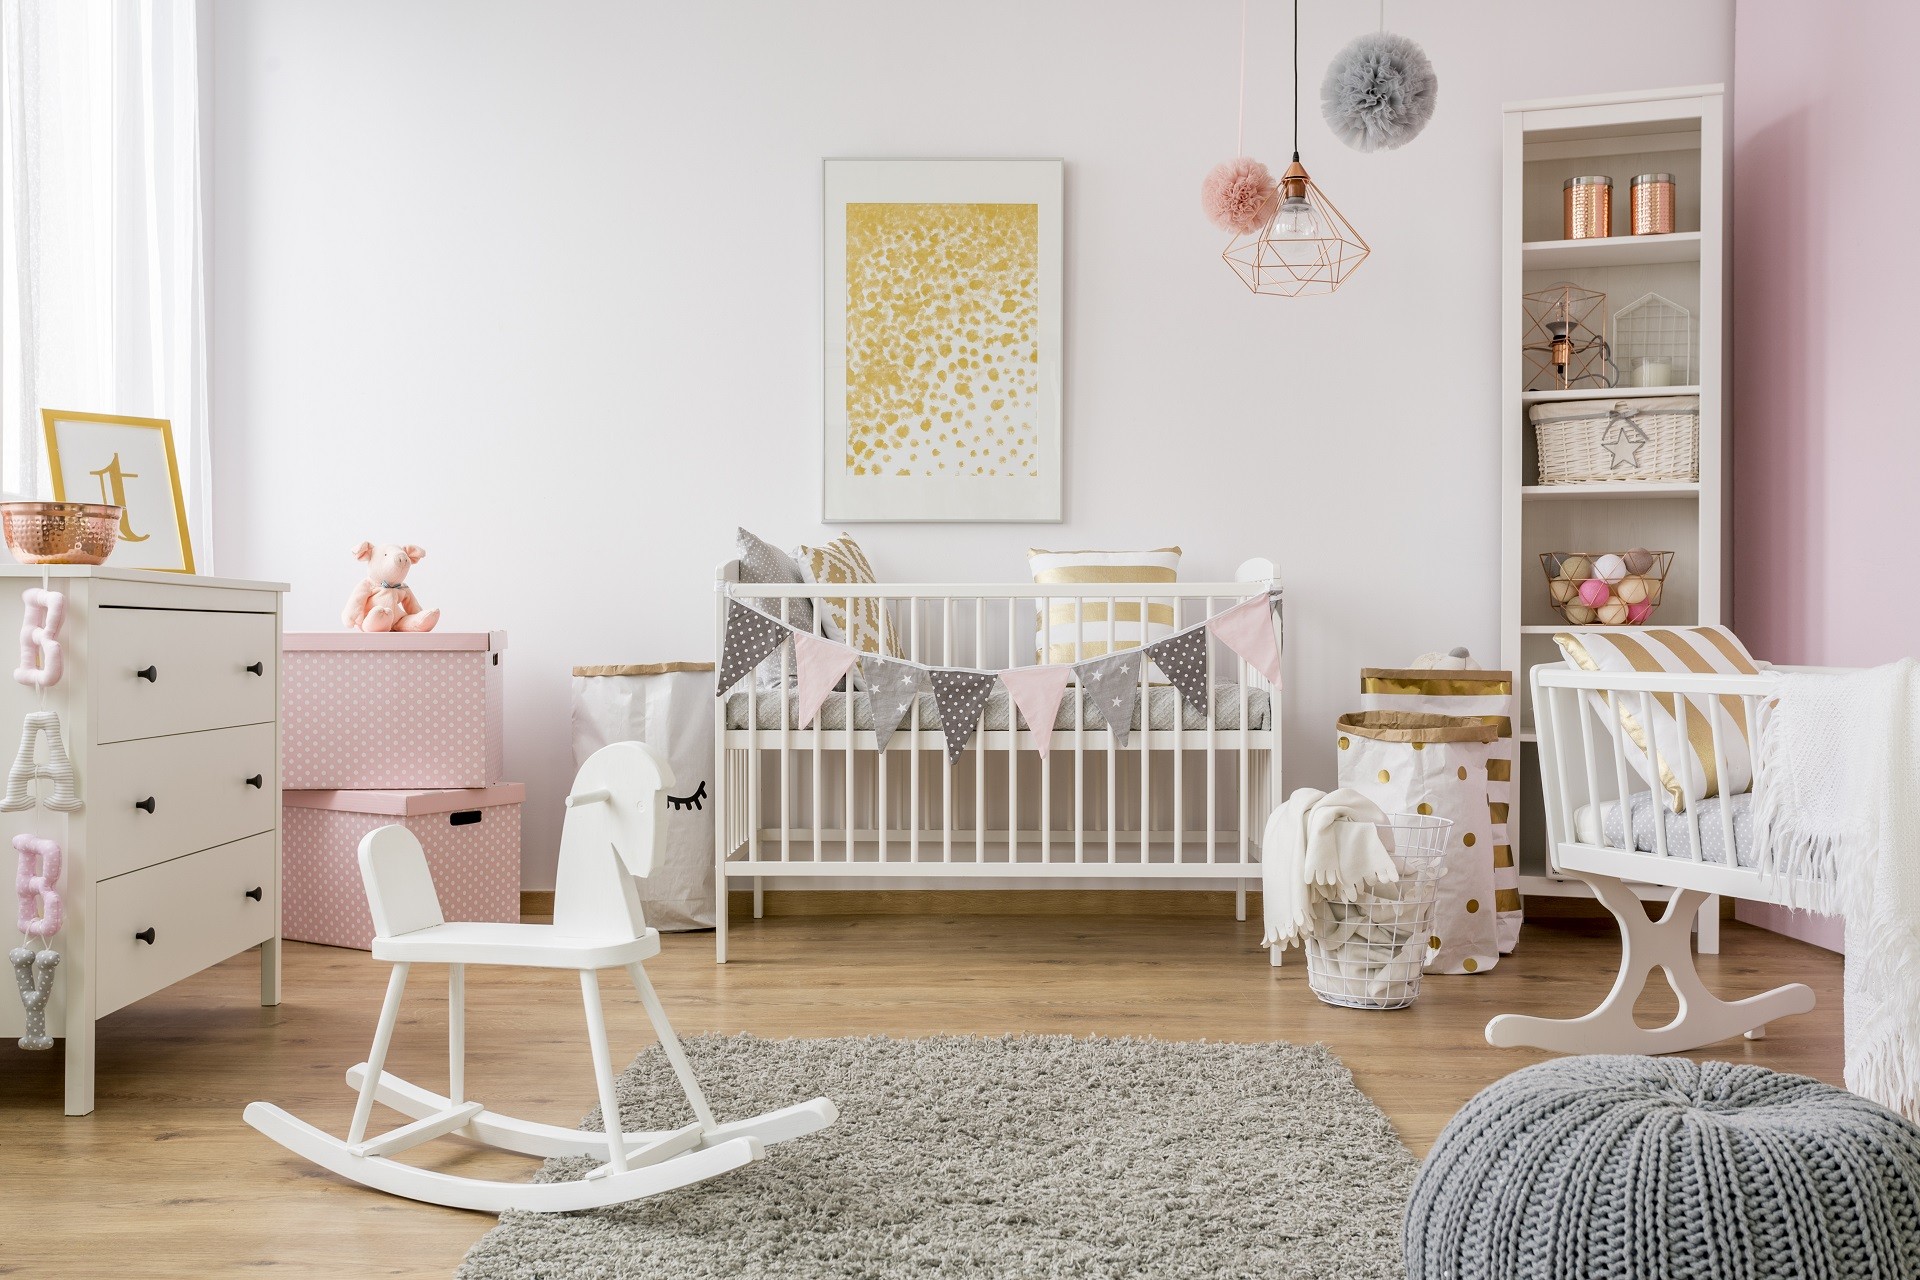 7 Ways to Redo Your Baby’s Nursery without Spending Too Much